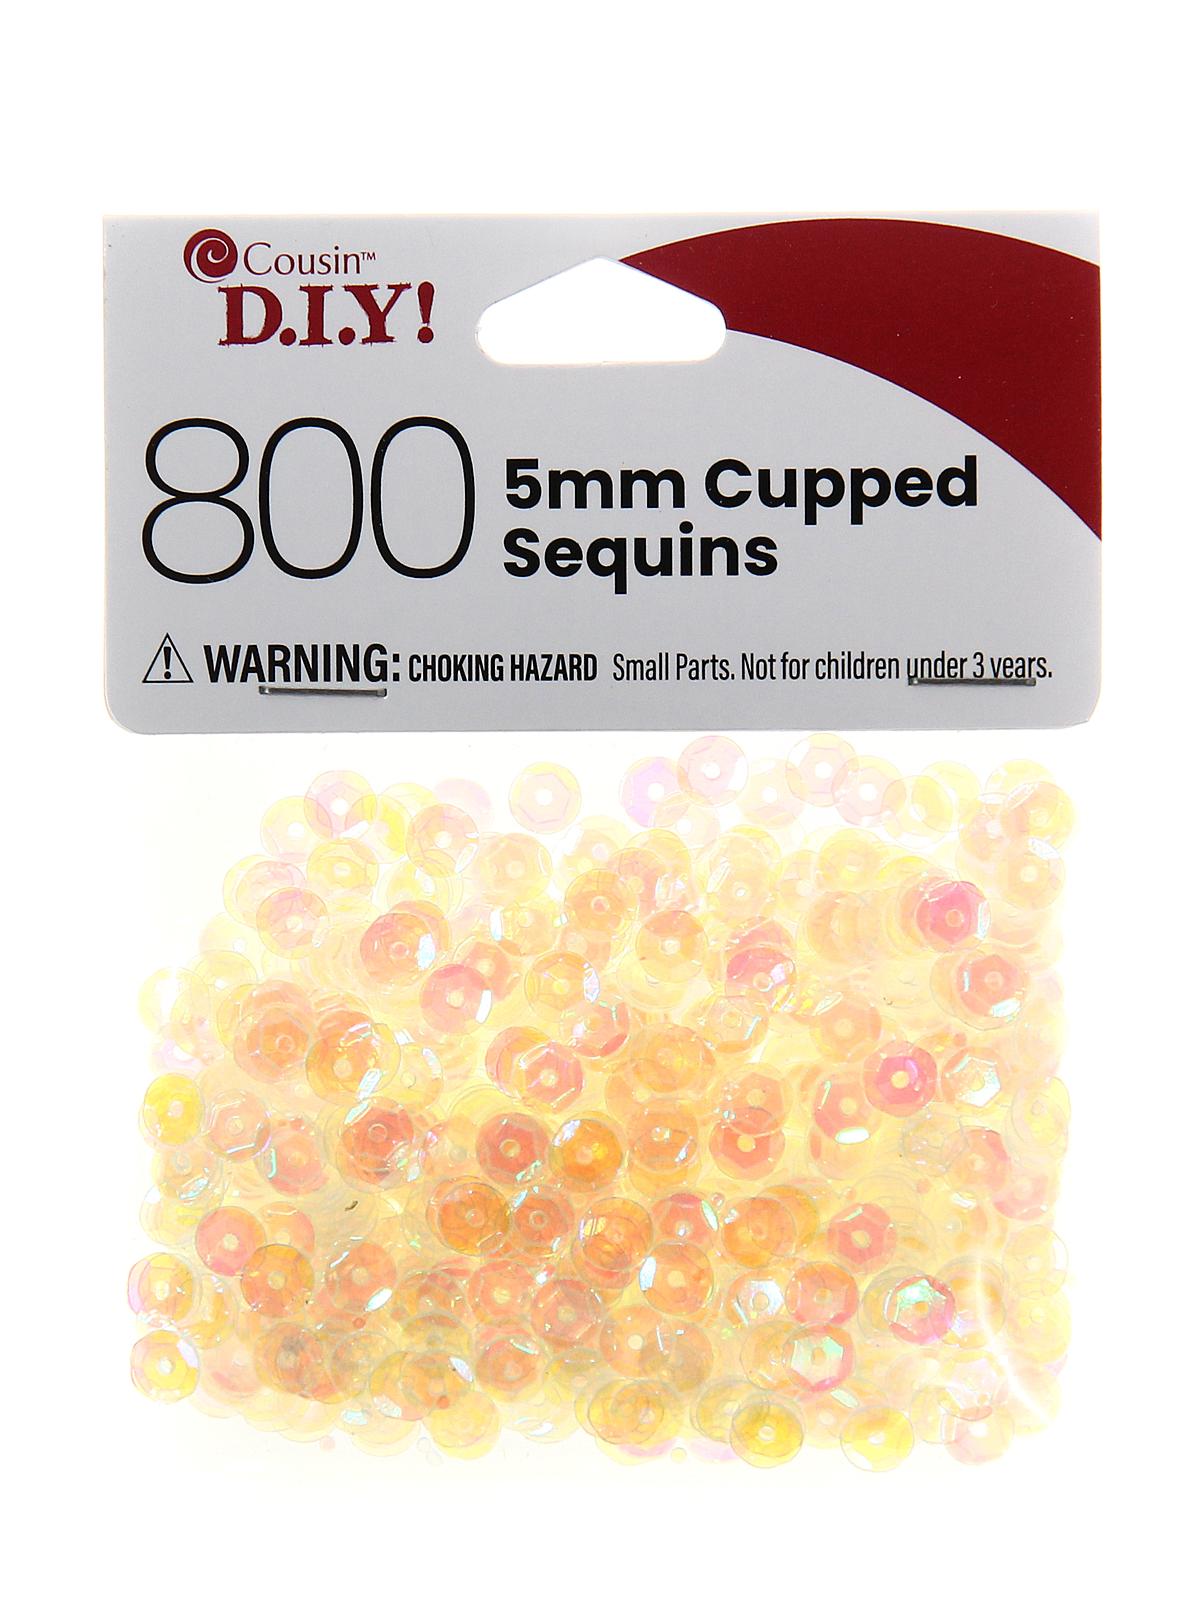 Cupped Sequins Iridescent 5 Mm Pack Of 800